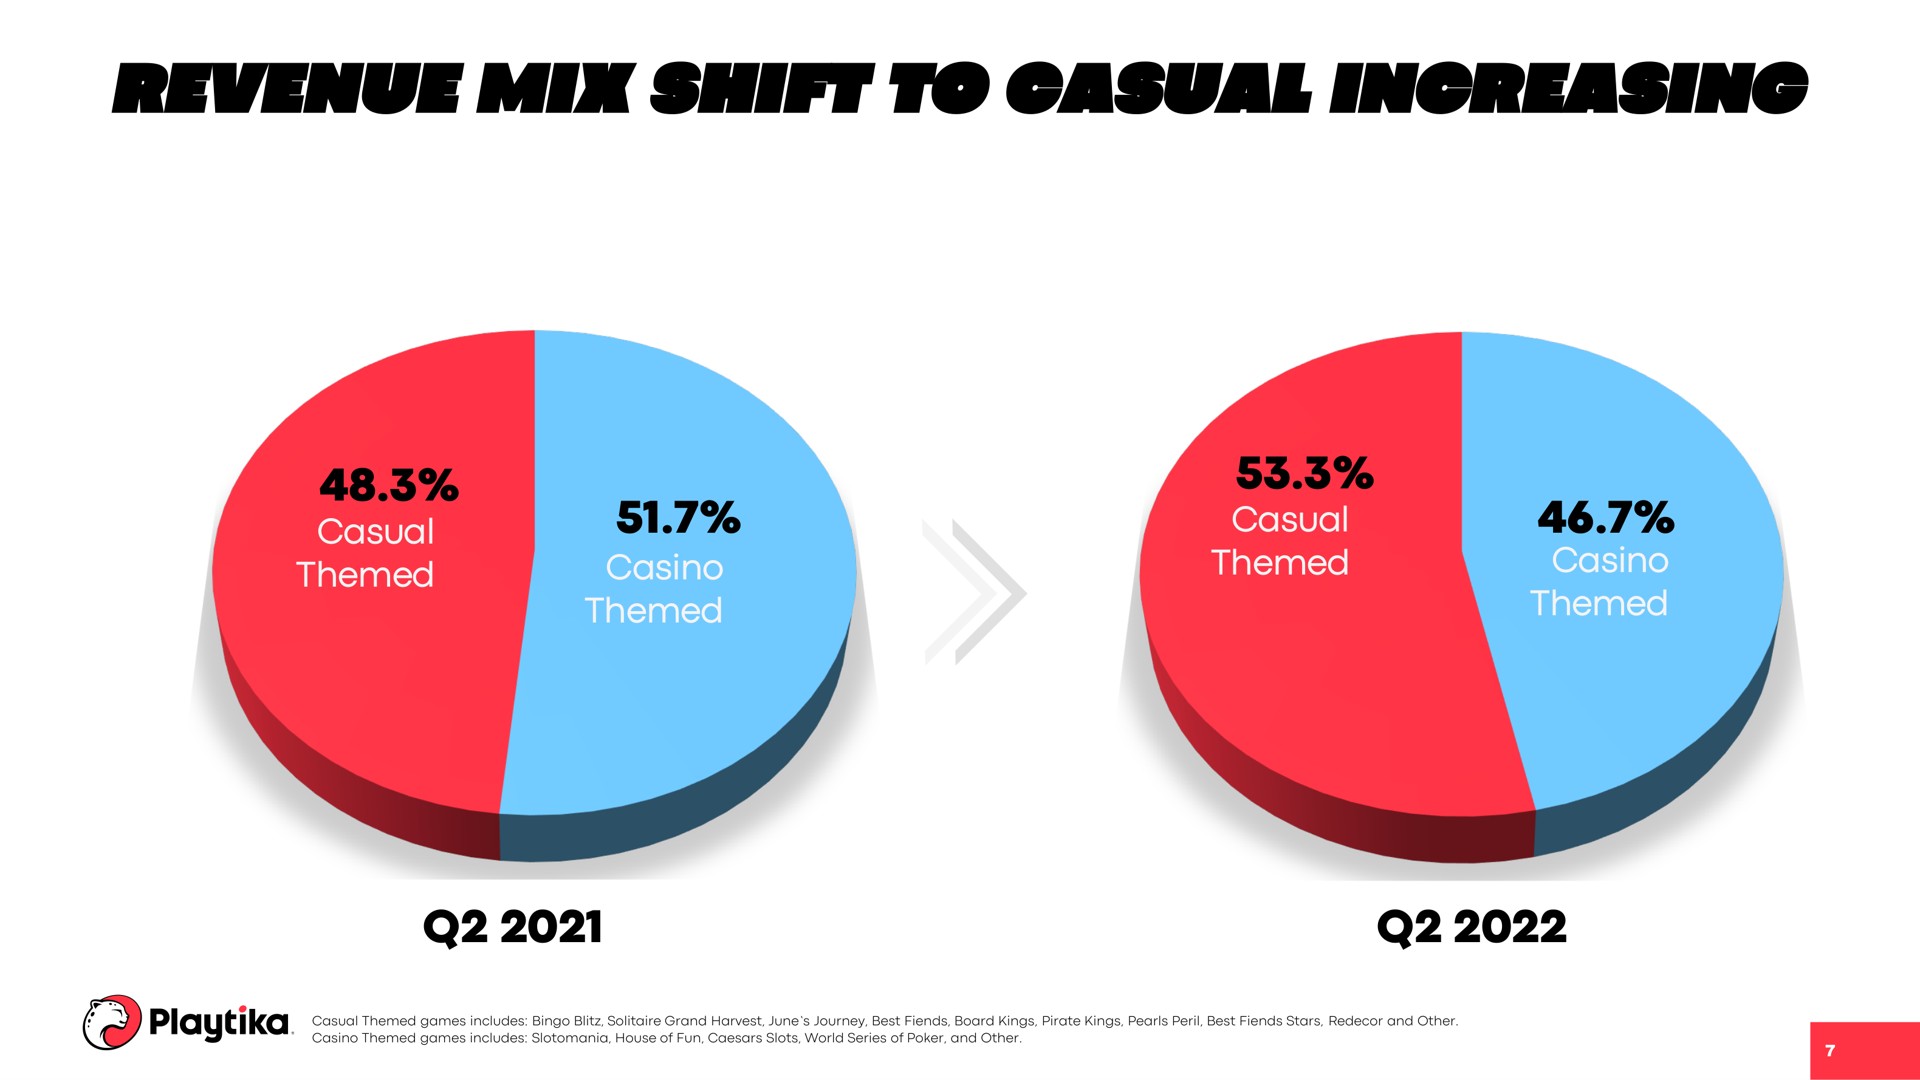 revenue mix shift to casual increasing themed themed | Playtika